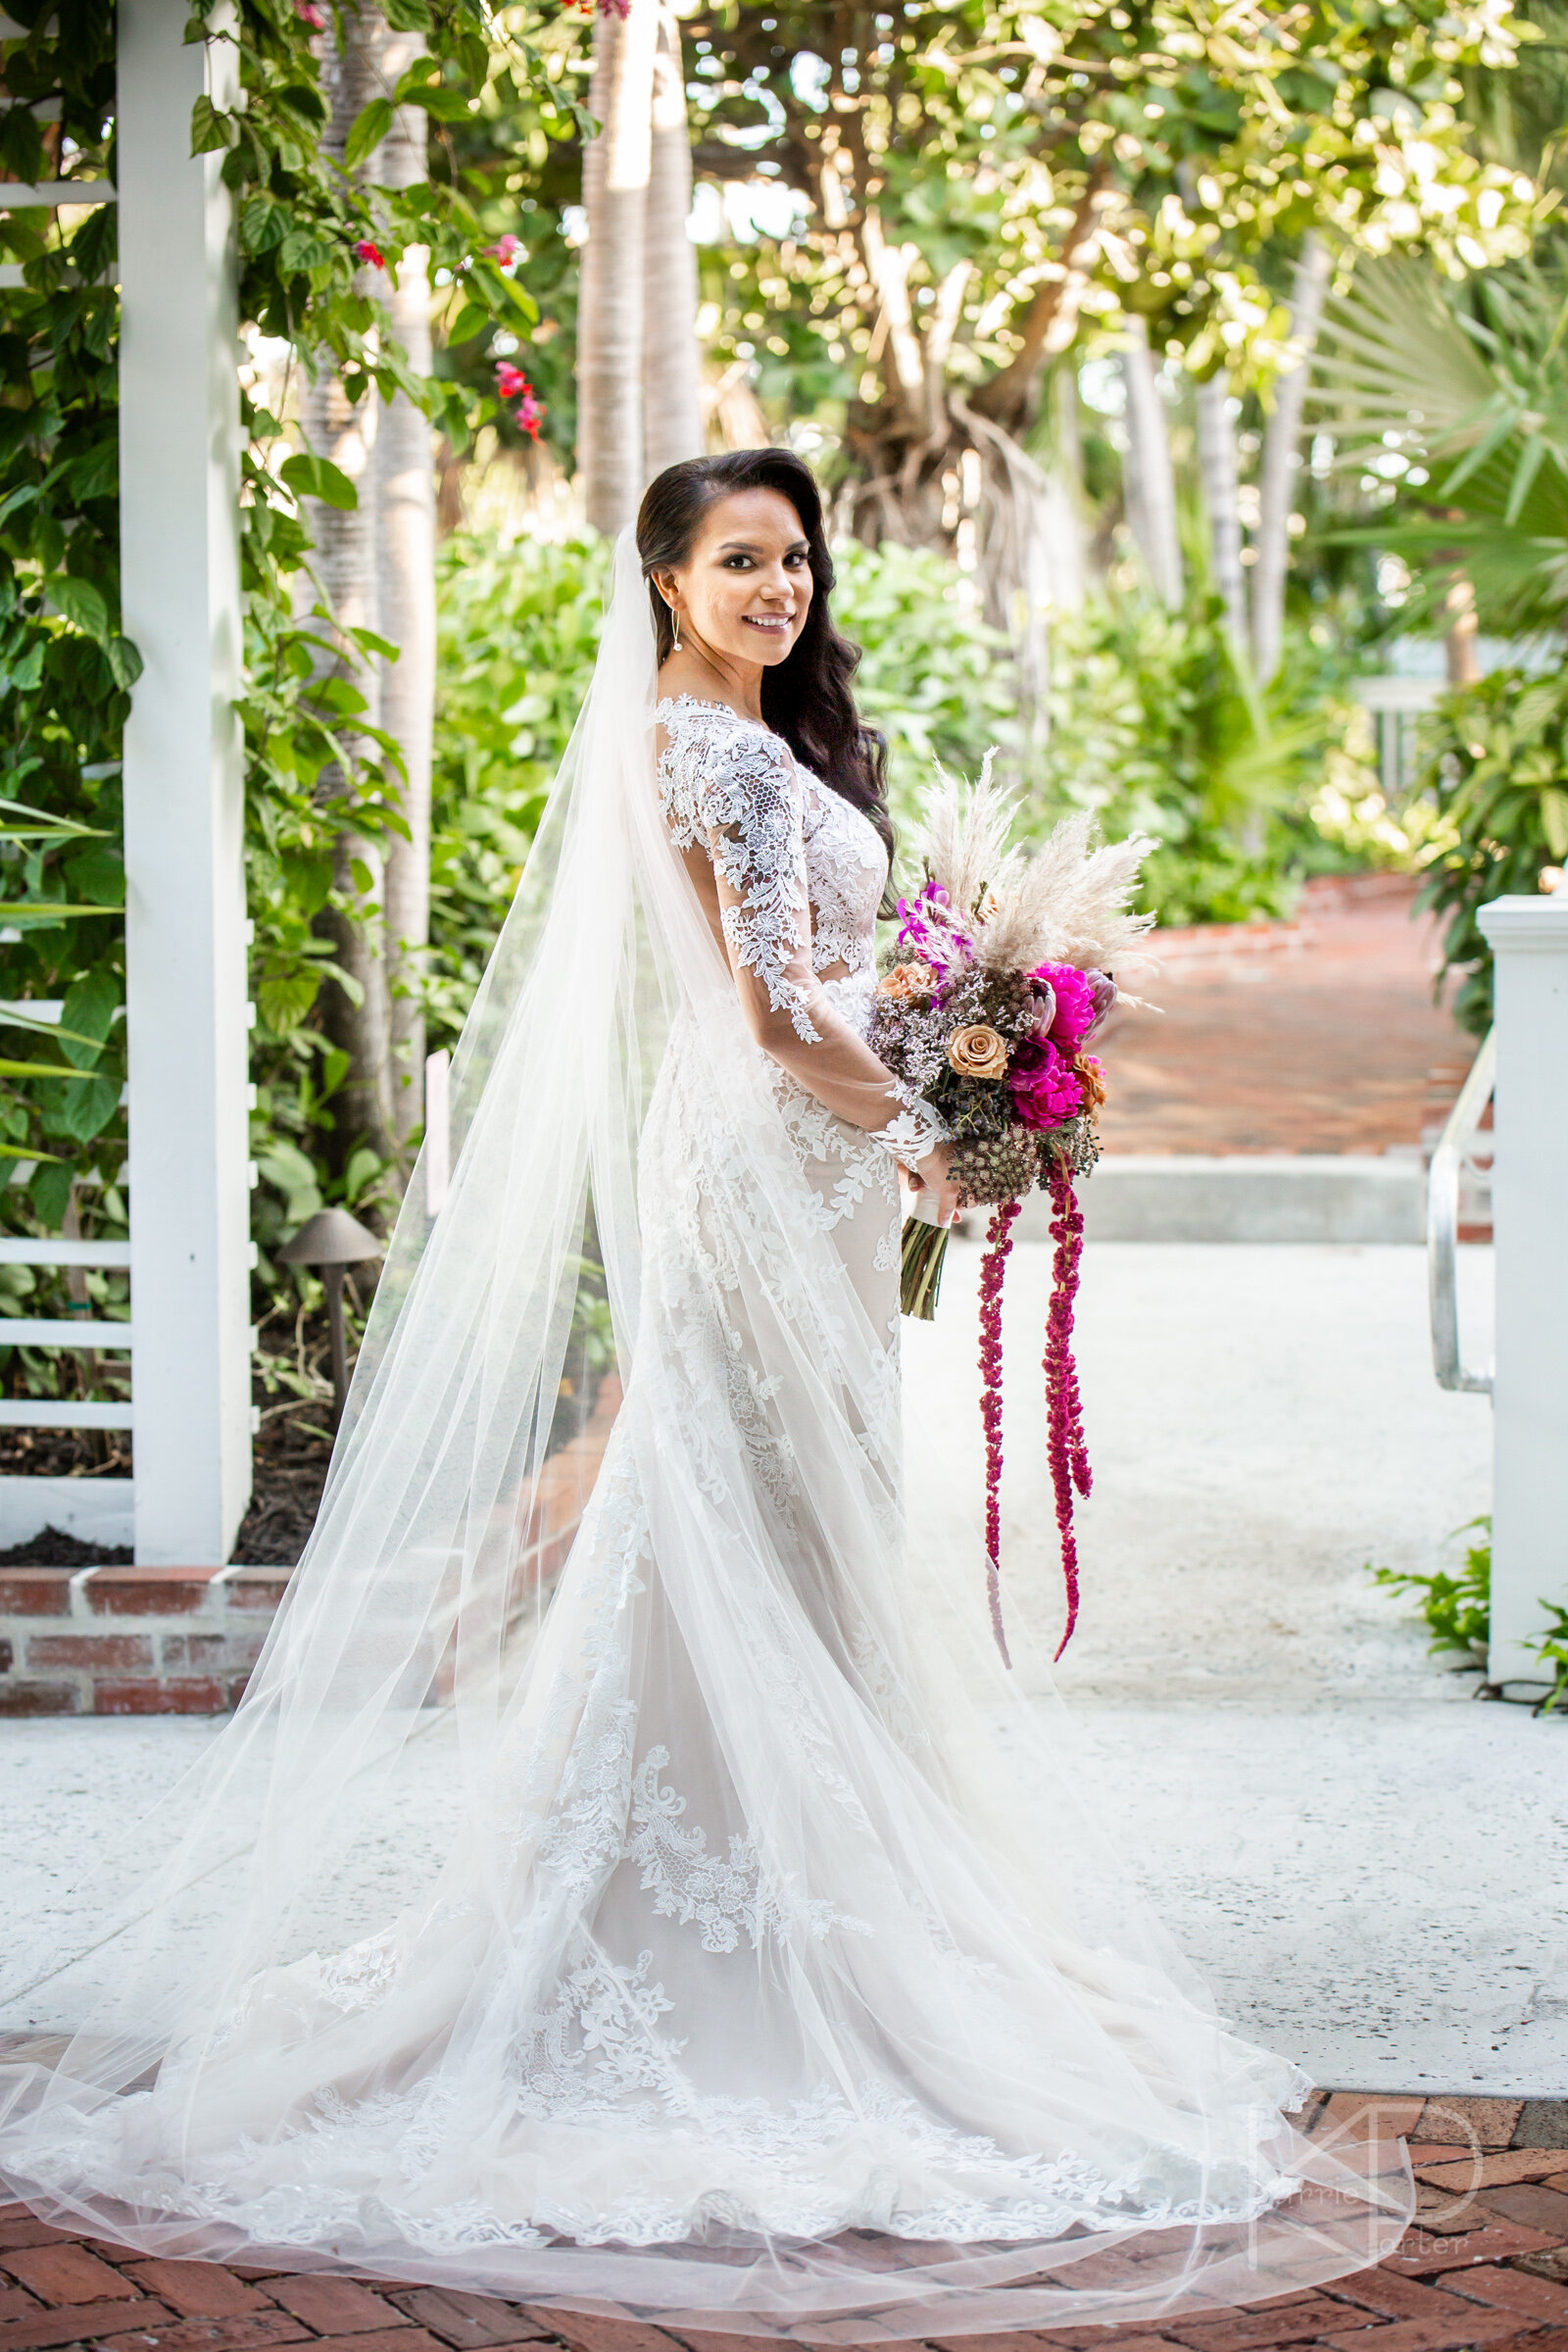  Kruse Wedding at Hemingway Home in Key West by Karrie Porter Photography 